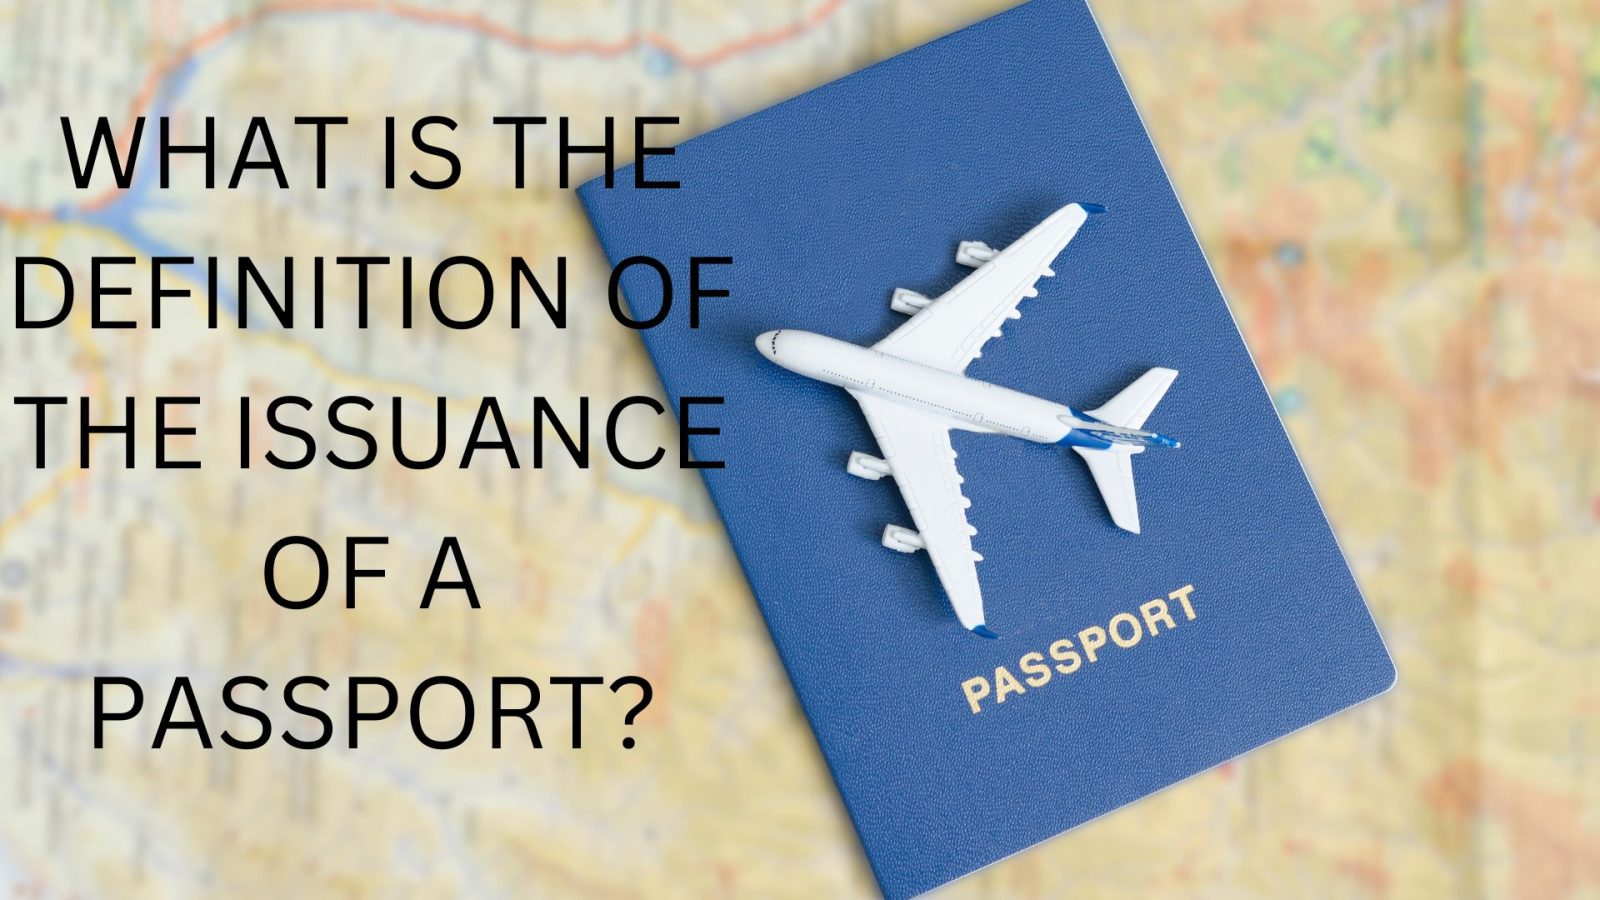 WHAT IS THE DEFINITION OF THE ISSUANCE OF A PASSPORT